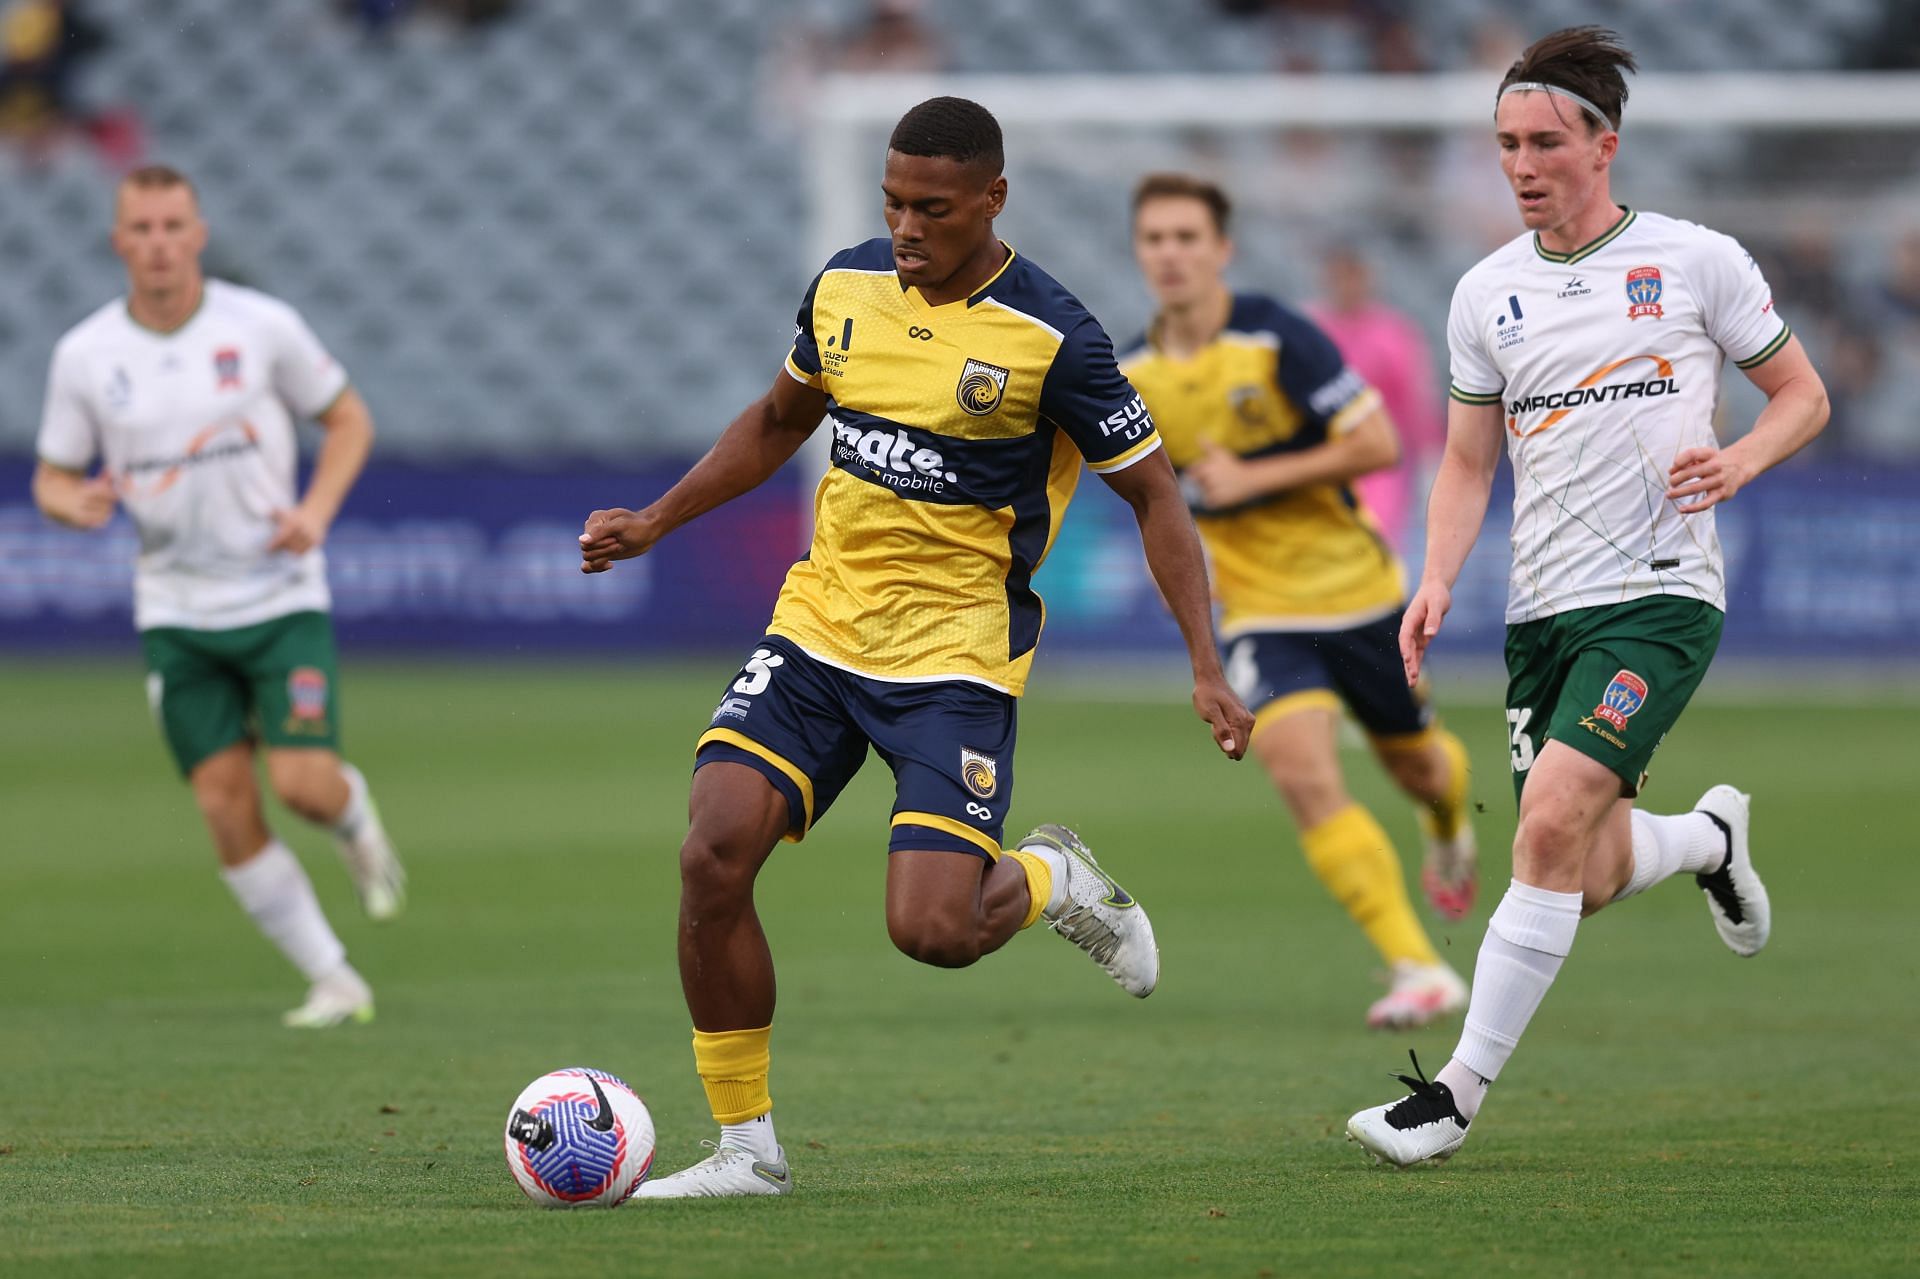 A-League Men Rd 5 - Newcastle Jets v Central Coast Mariners